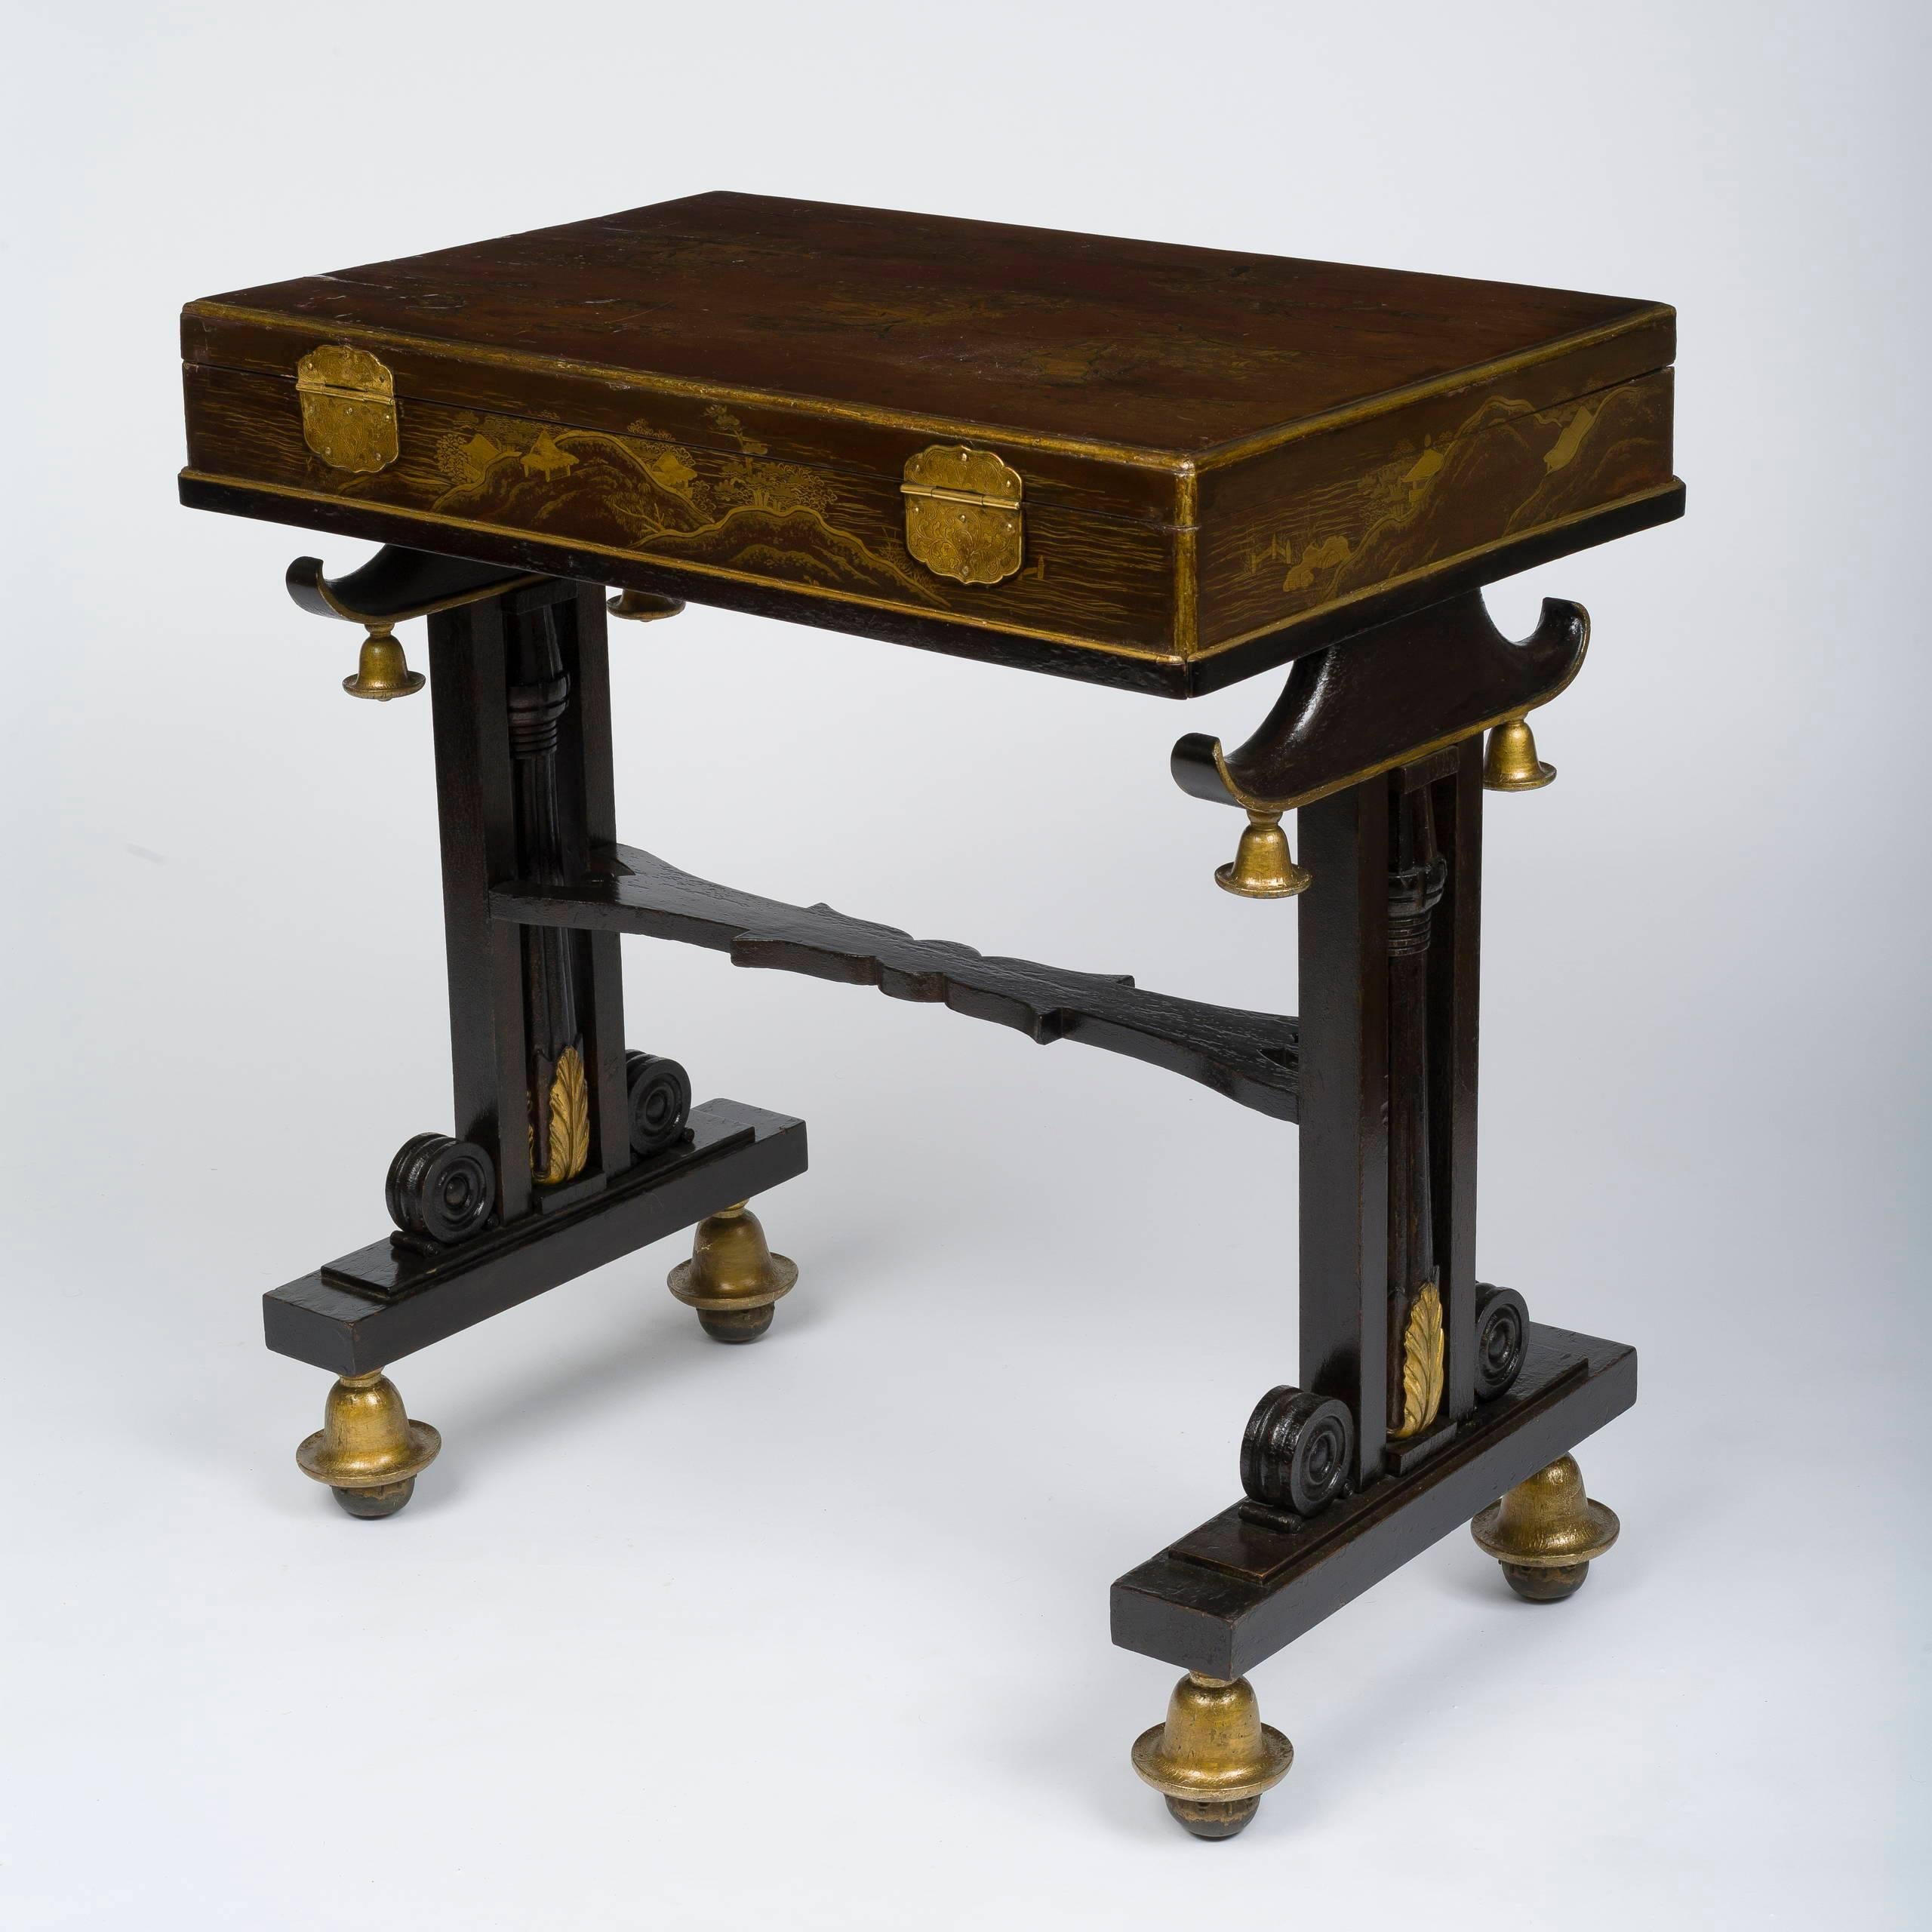 The Japanese lacquered box hinged to open to an adjustable fabric-inset writing surface, inset in a Stand with twin supports in the Chinese taste. This exceptional desk is very much evocative of the exotic style made fashionable by the Royal